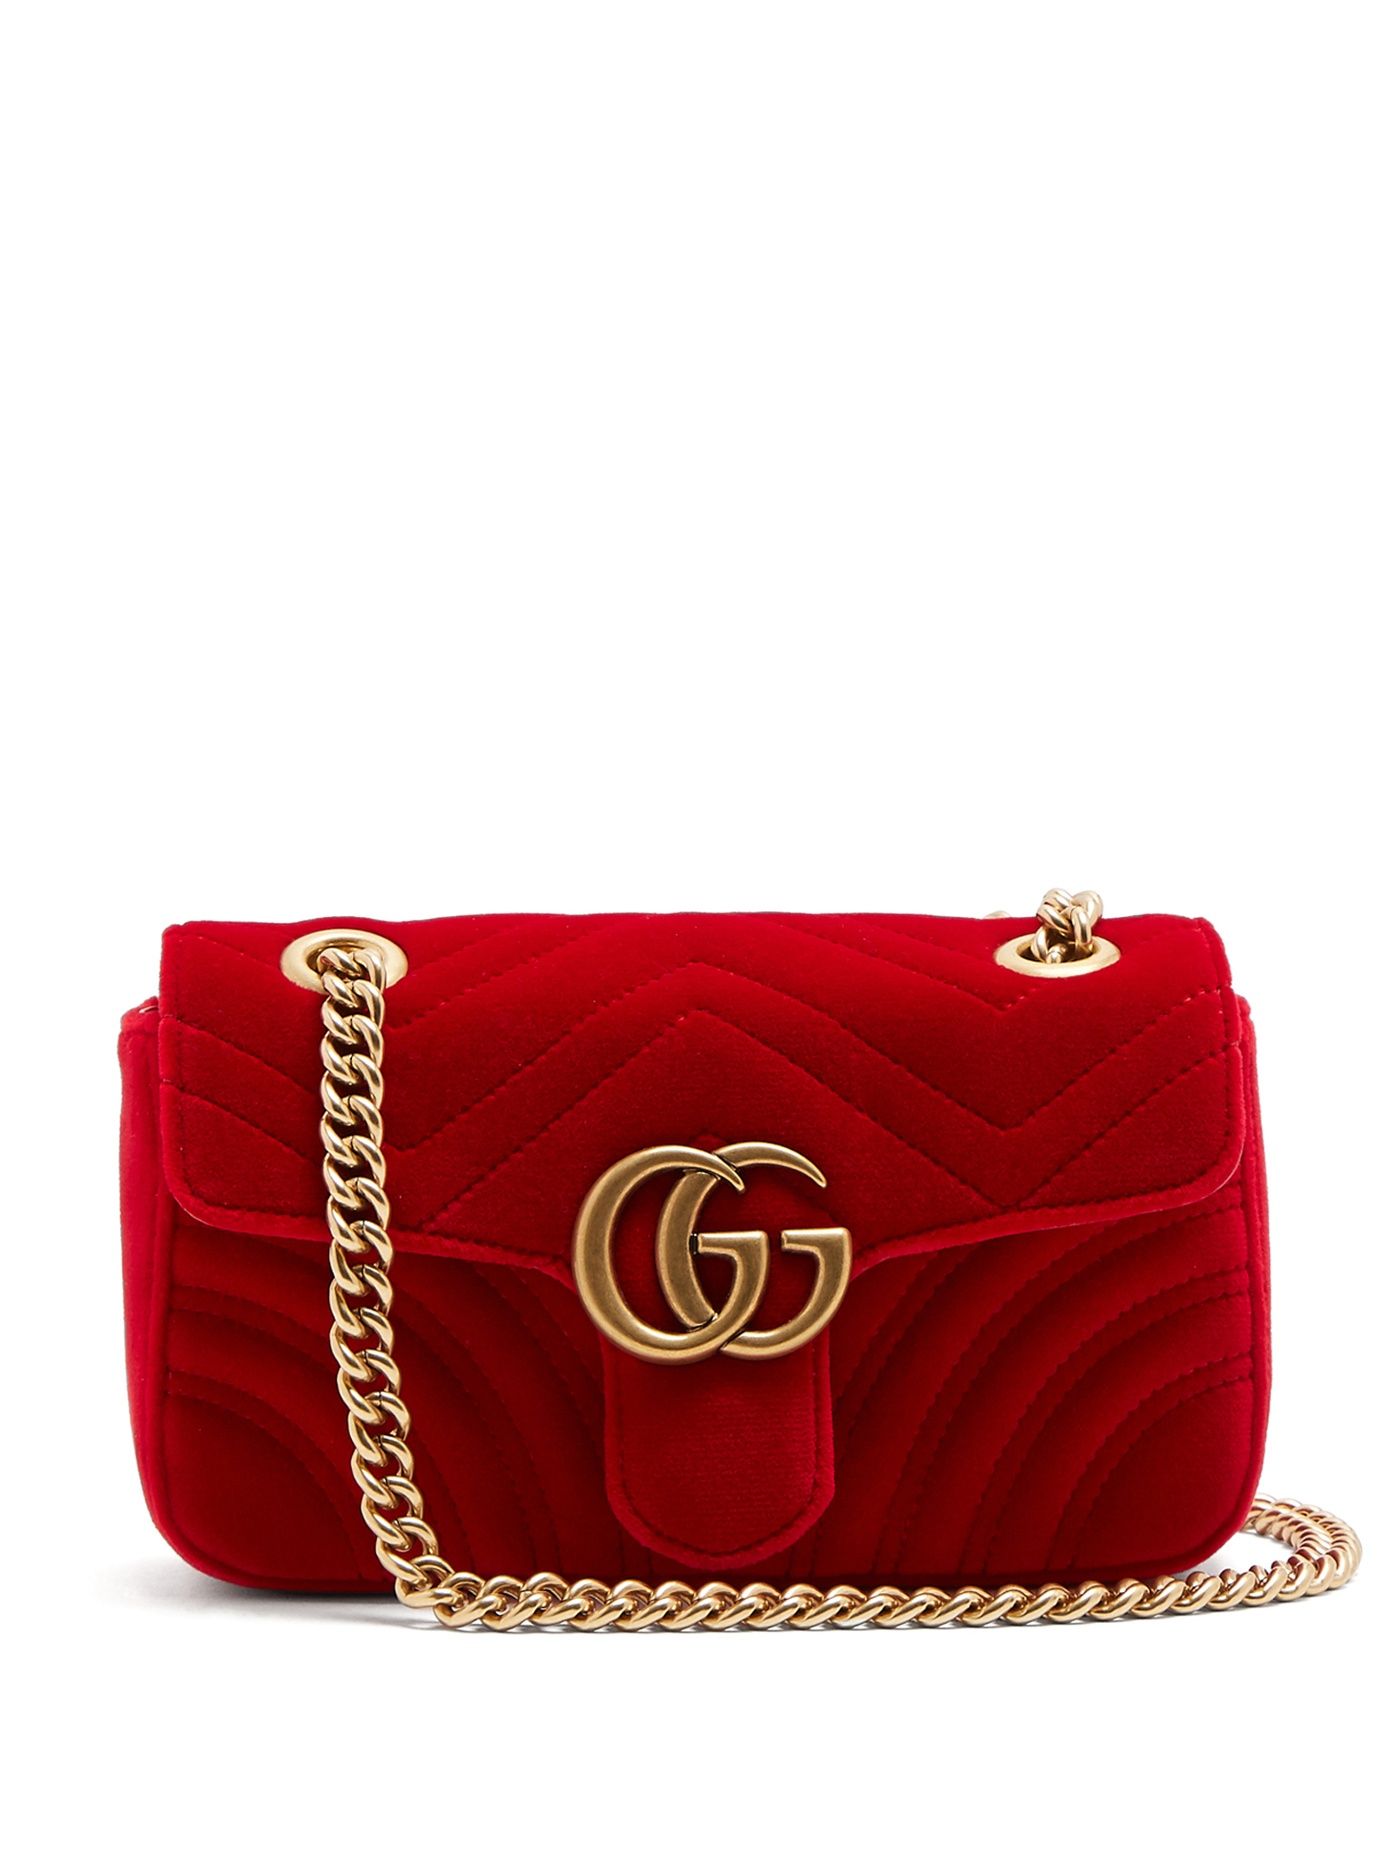 red marmont gucci bag